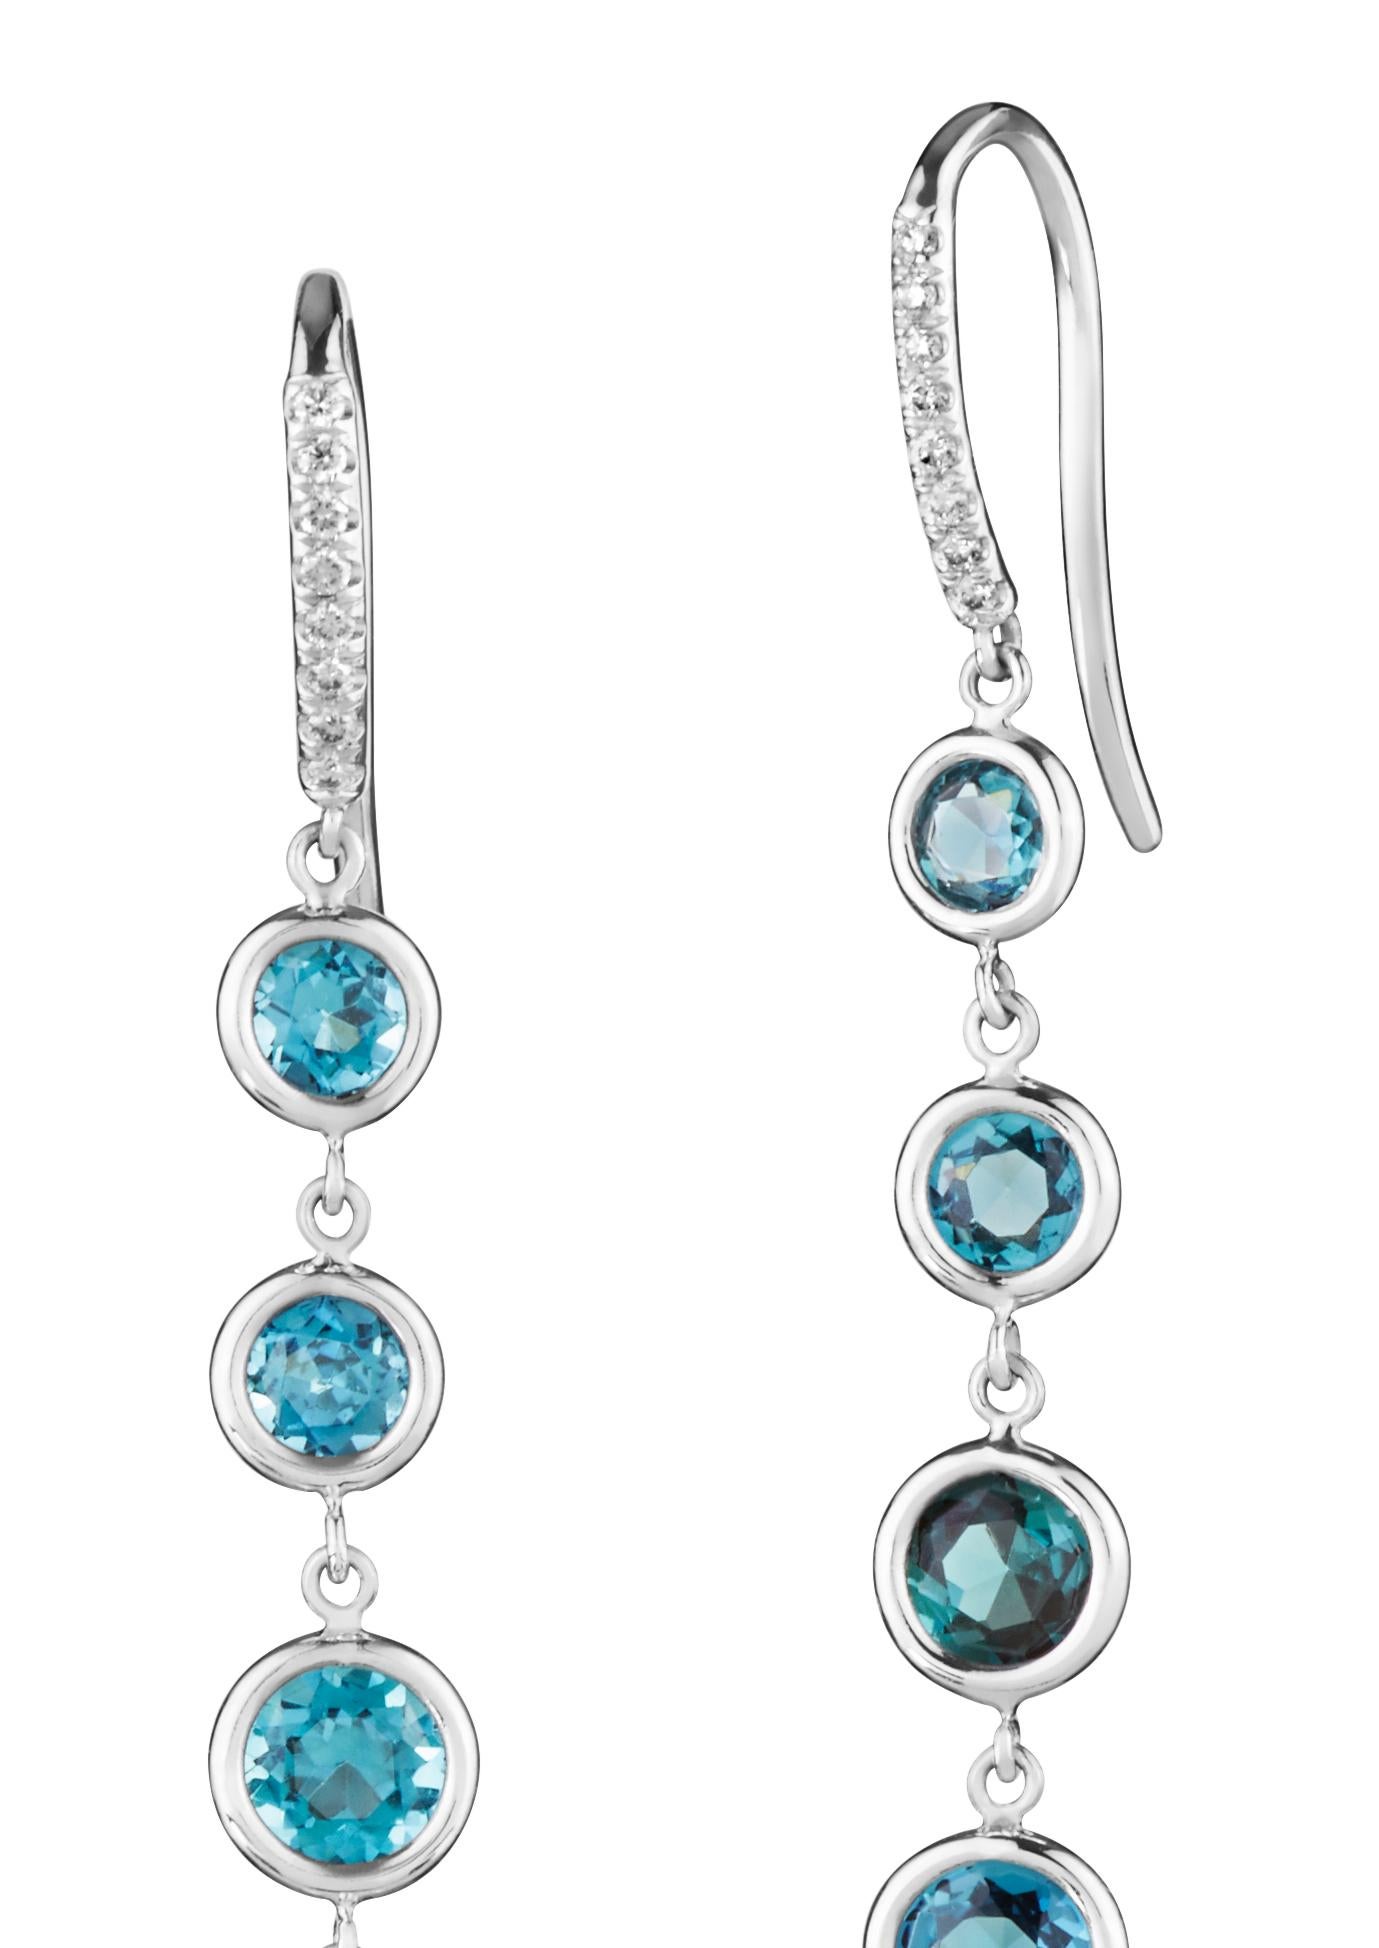 Stunning, long white gold and mixed natural green/blue tourmaline earrings. The hooks are accented with white pave diamonds. These earrings swing and move and are light as air.

18k white gold 
3.10 cts of tourmaline 
complimentary domestic ground